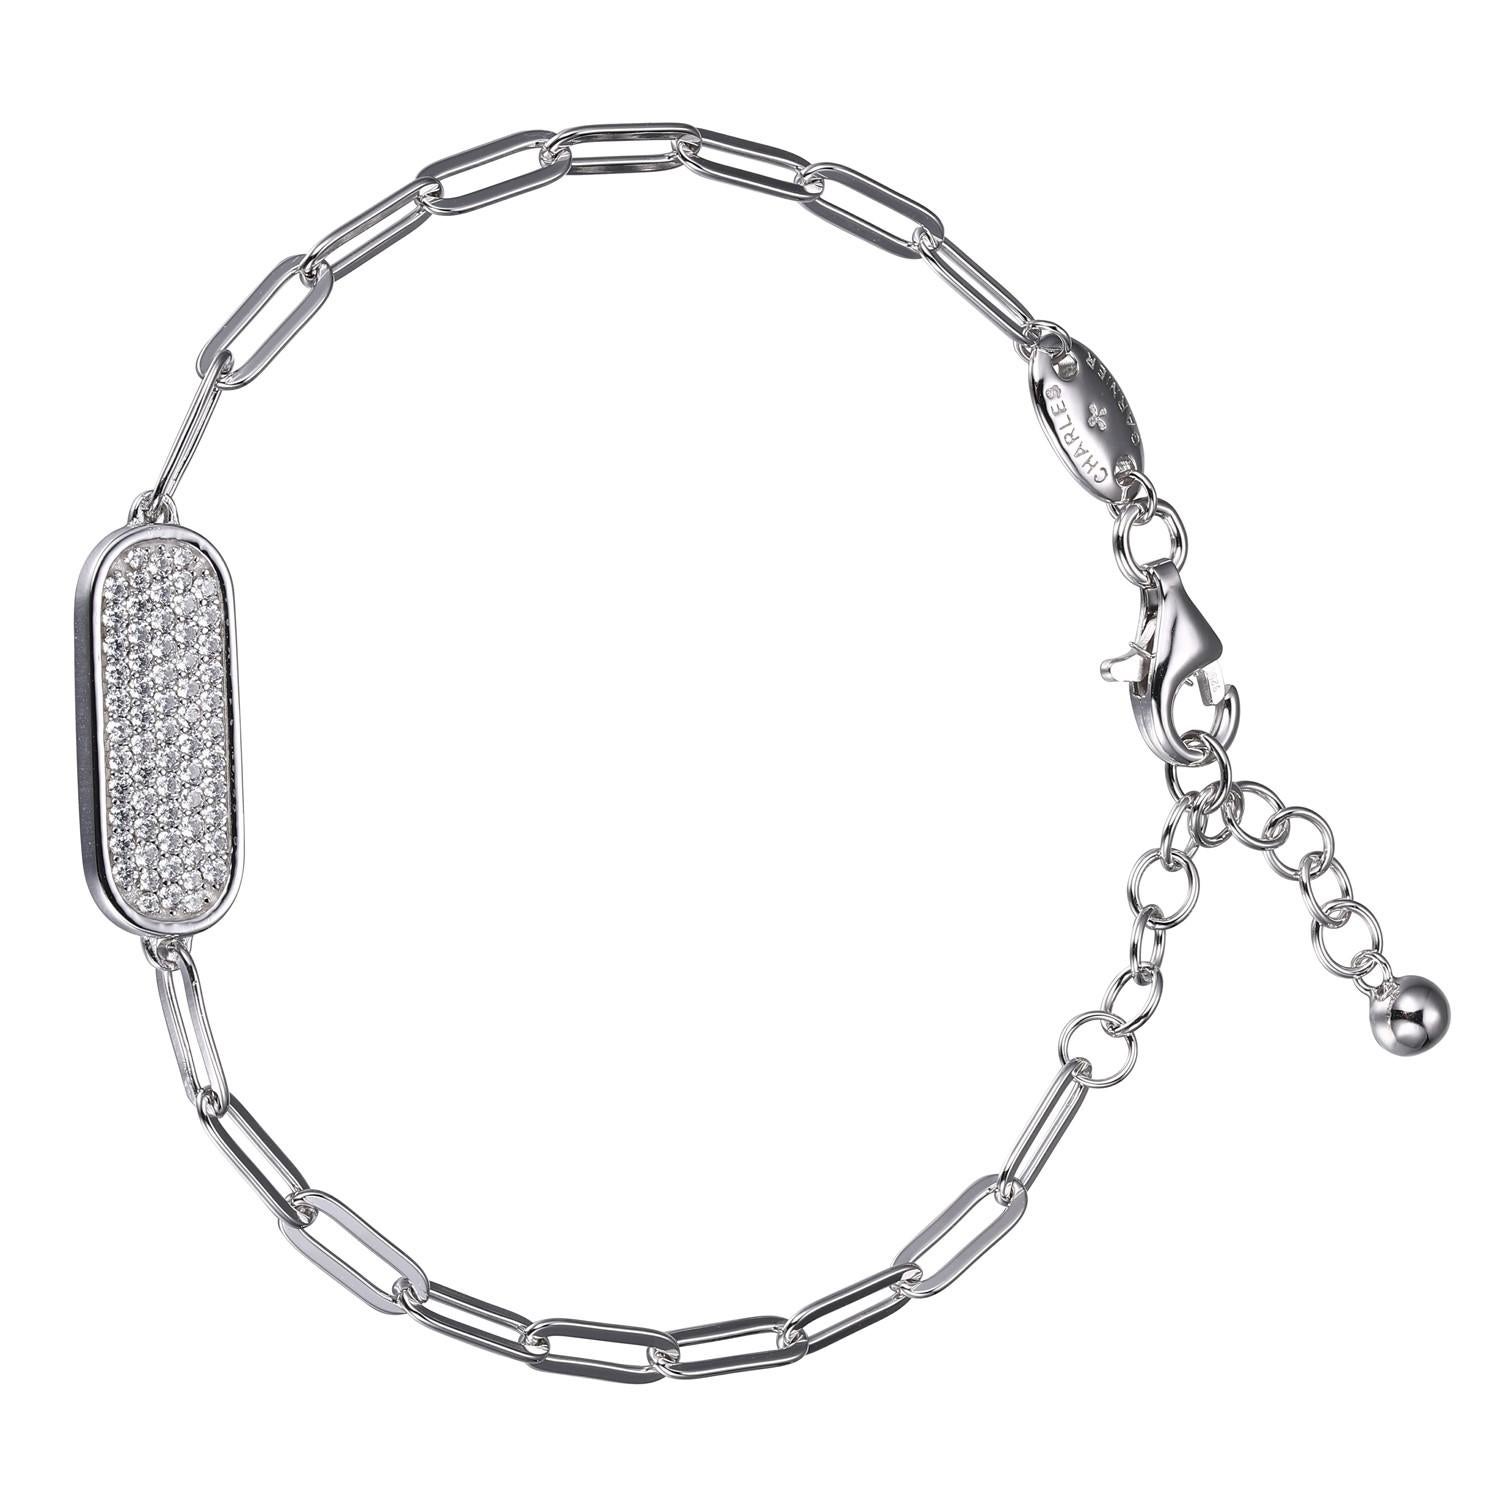 Sterling Silver Bracelet made with Paperclip Chain (3mm) and Pave CZ Motif, Measures 6.75